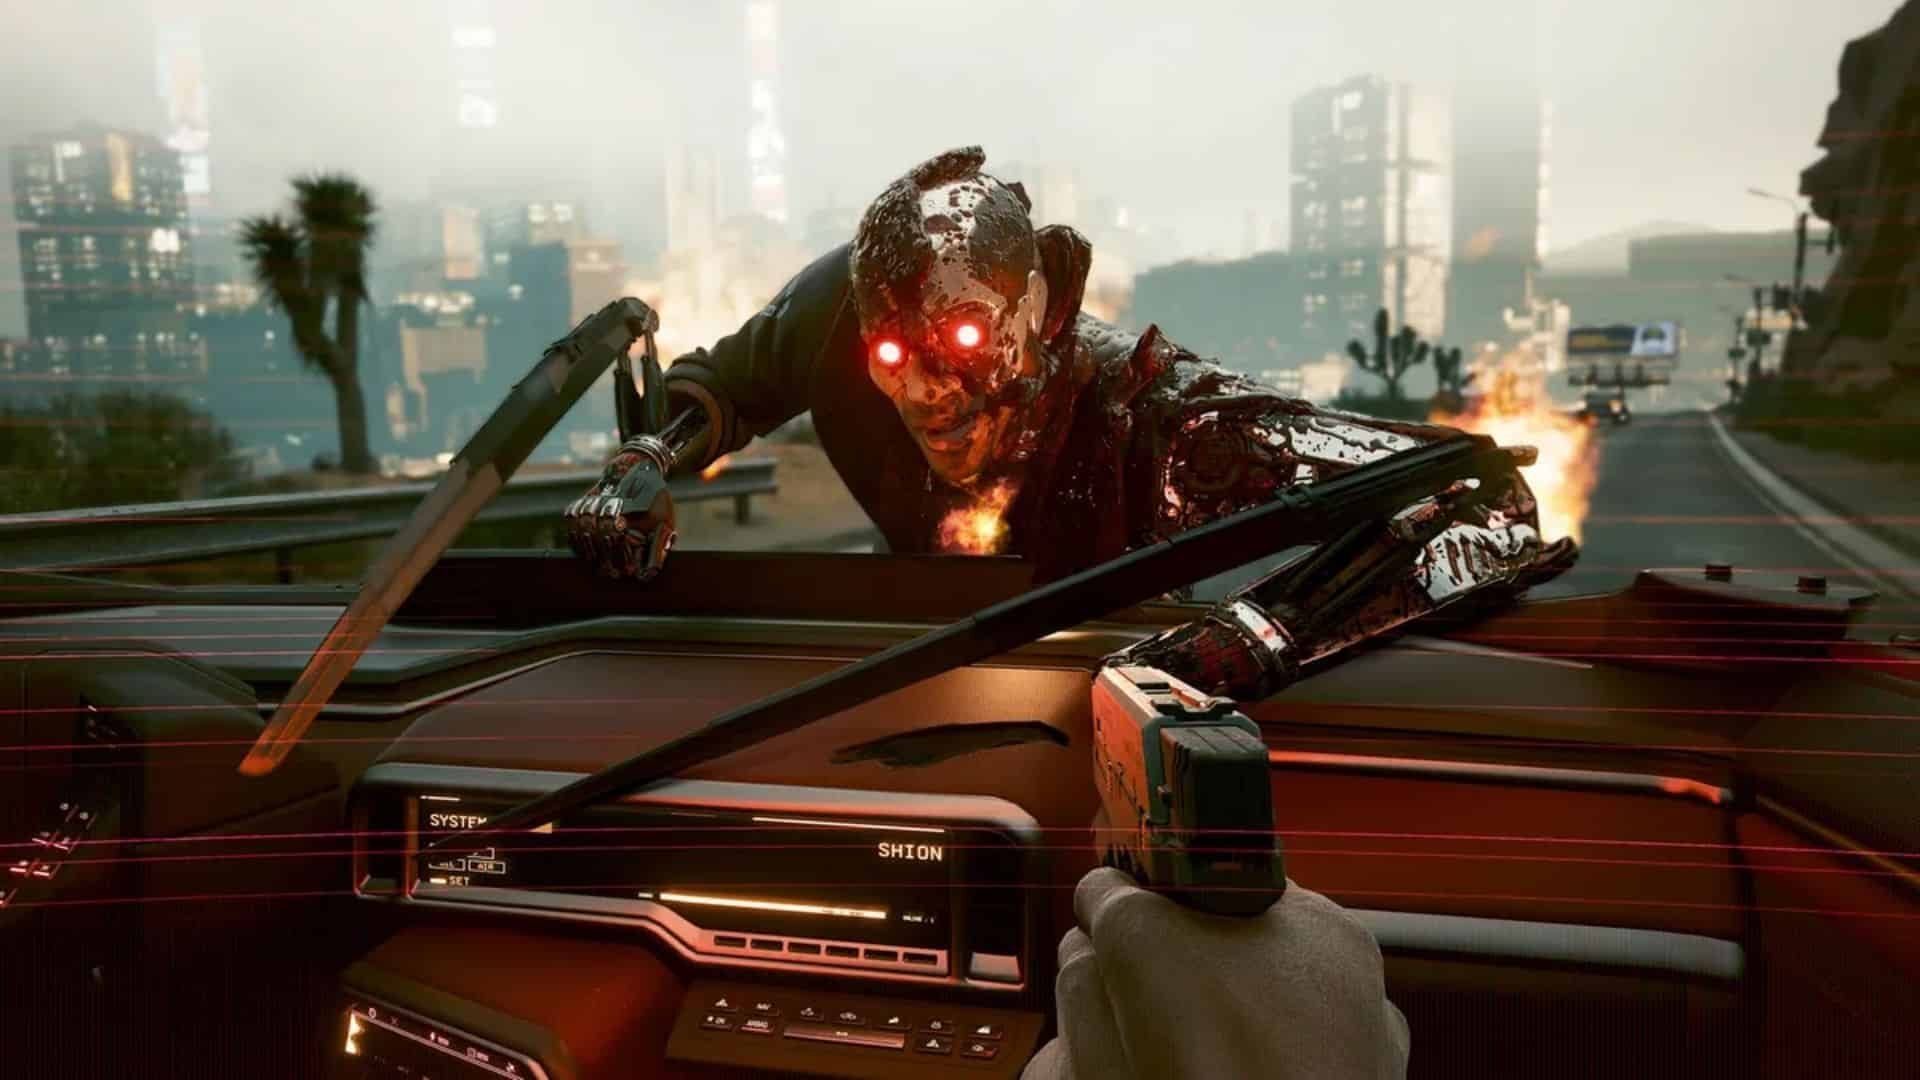 maelstrom enemy clinging onto player's car in cyberpunk 2077